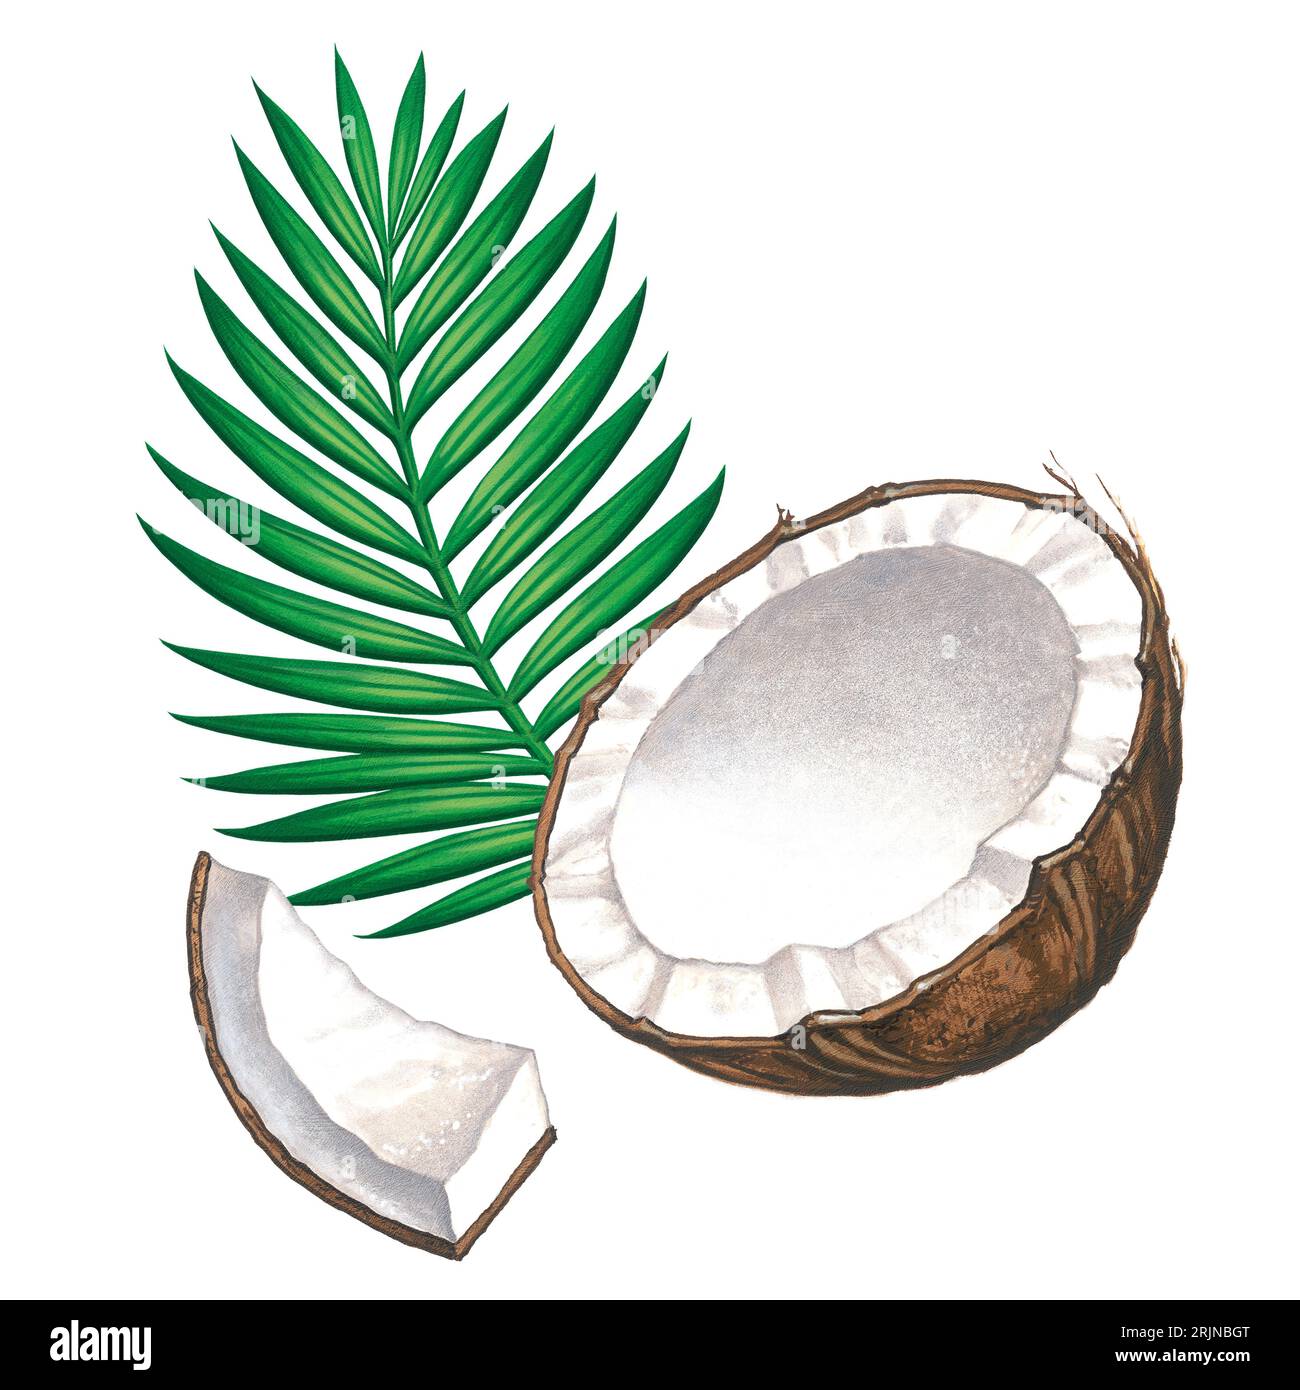 Illustrated Coconut with Palm Branch Isolated Stock Photo